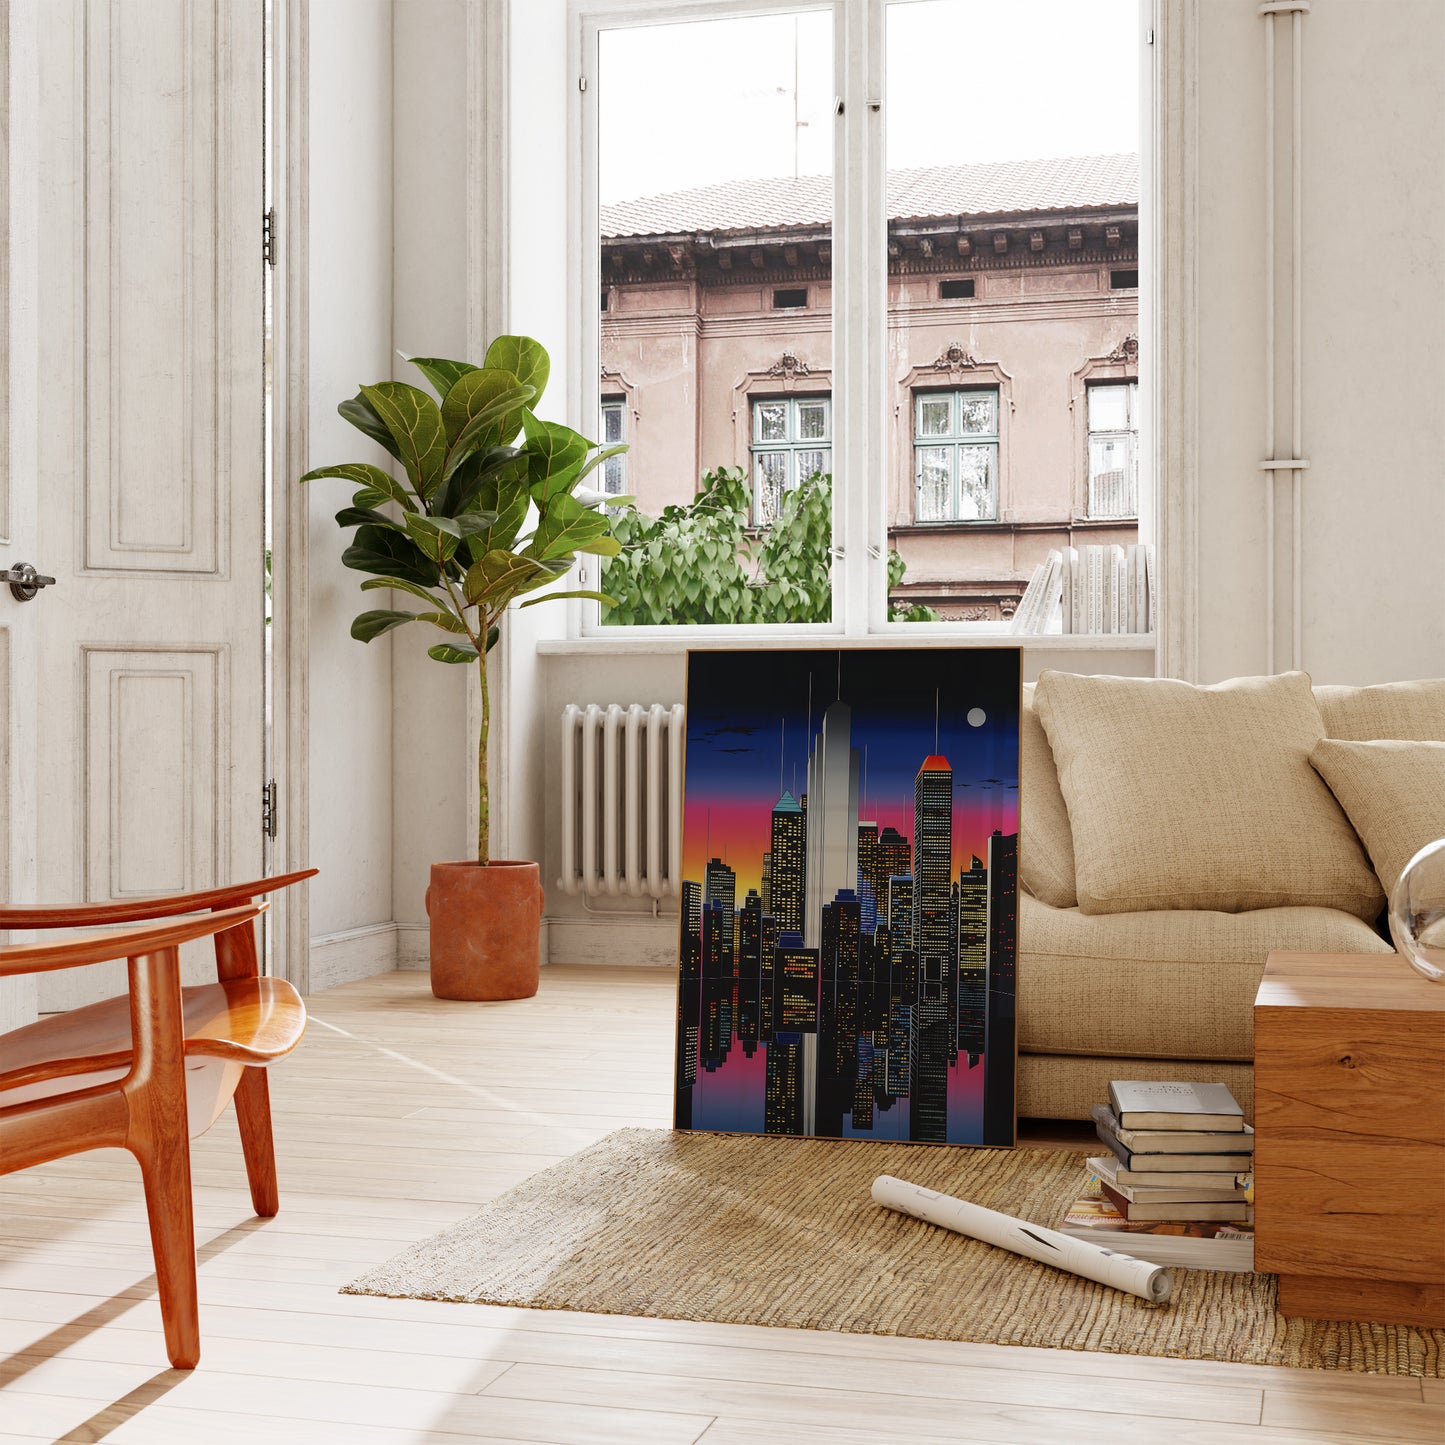 A modern living room with a cityscape painting leaning against the wall.